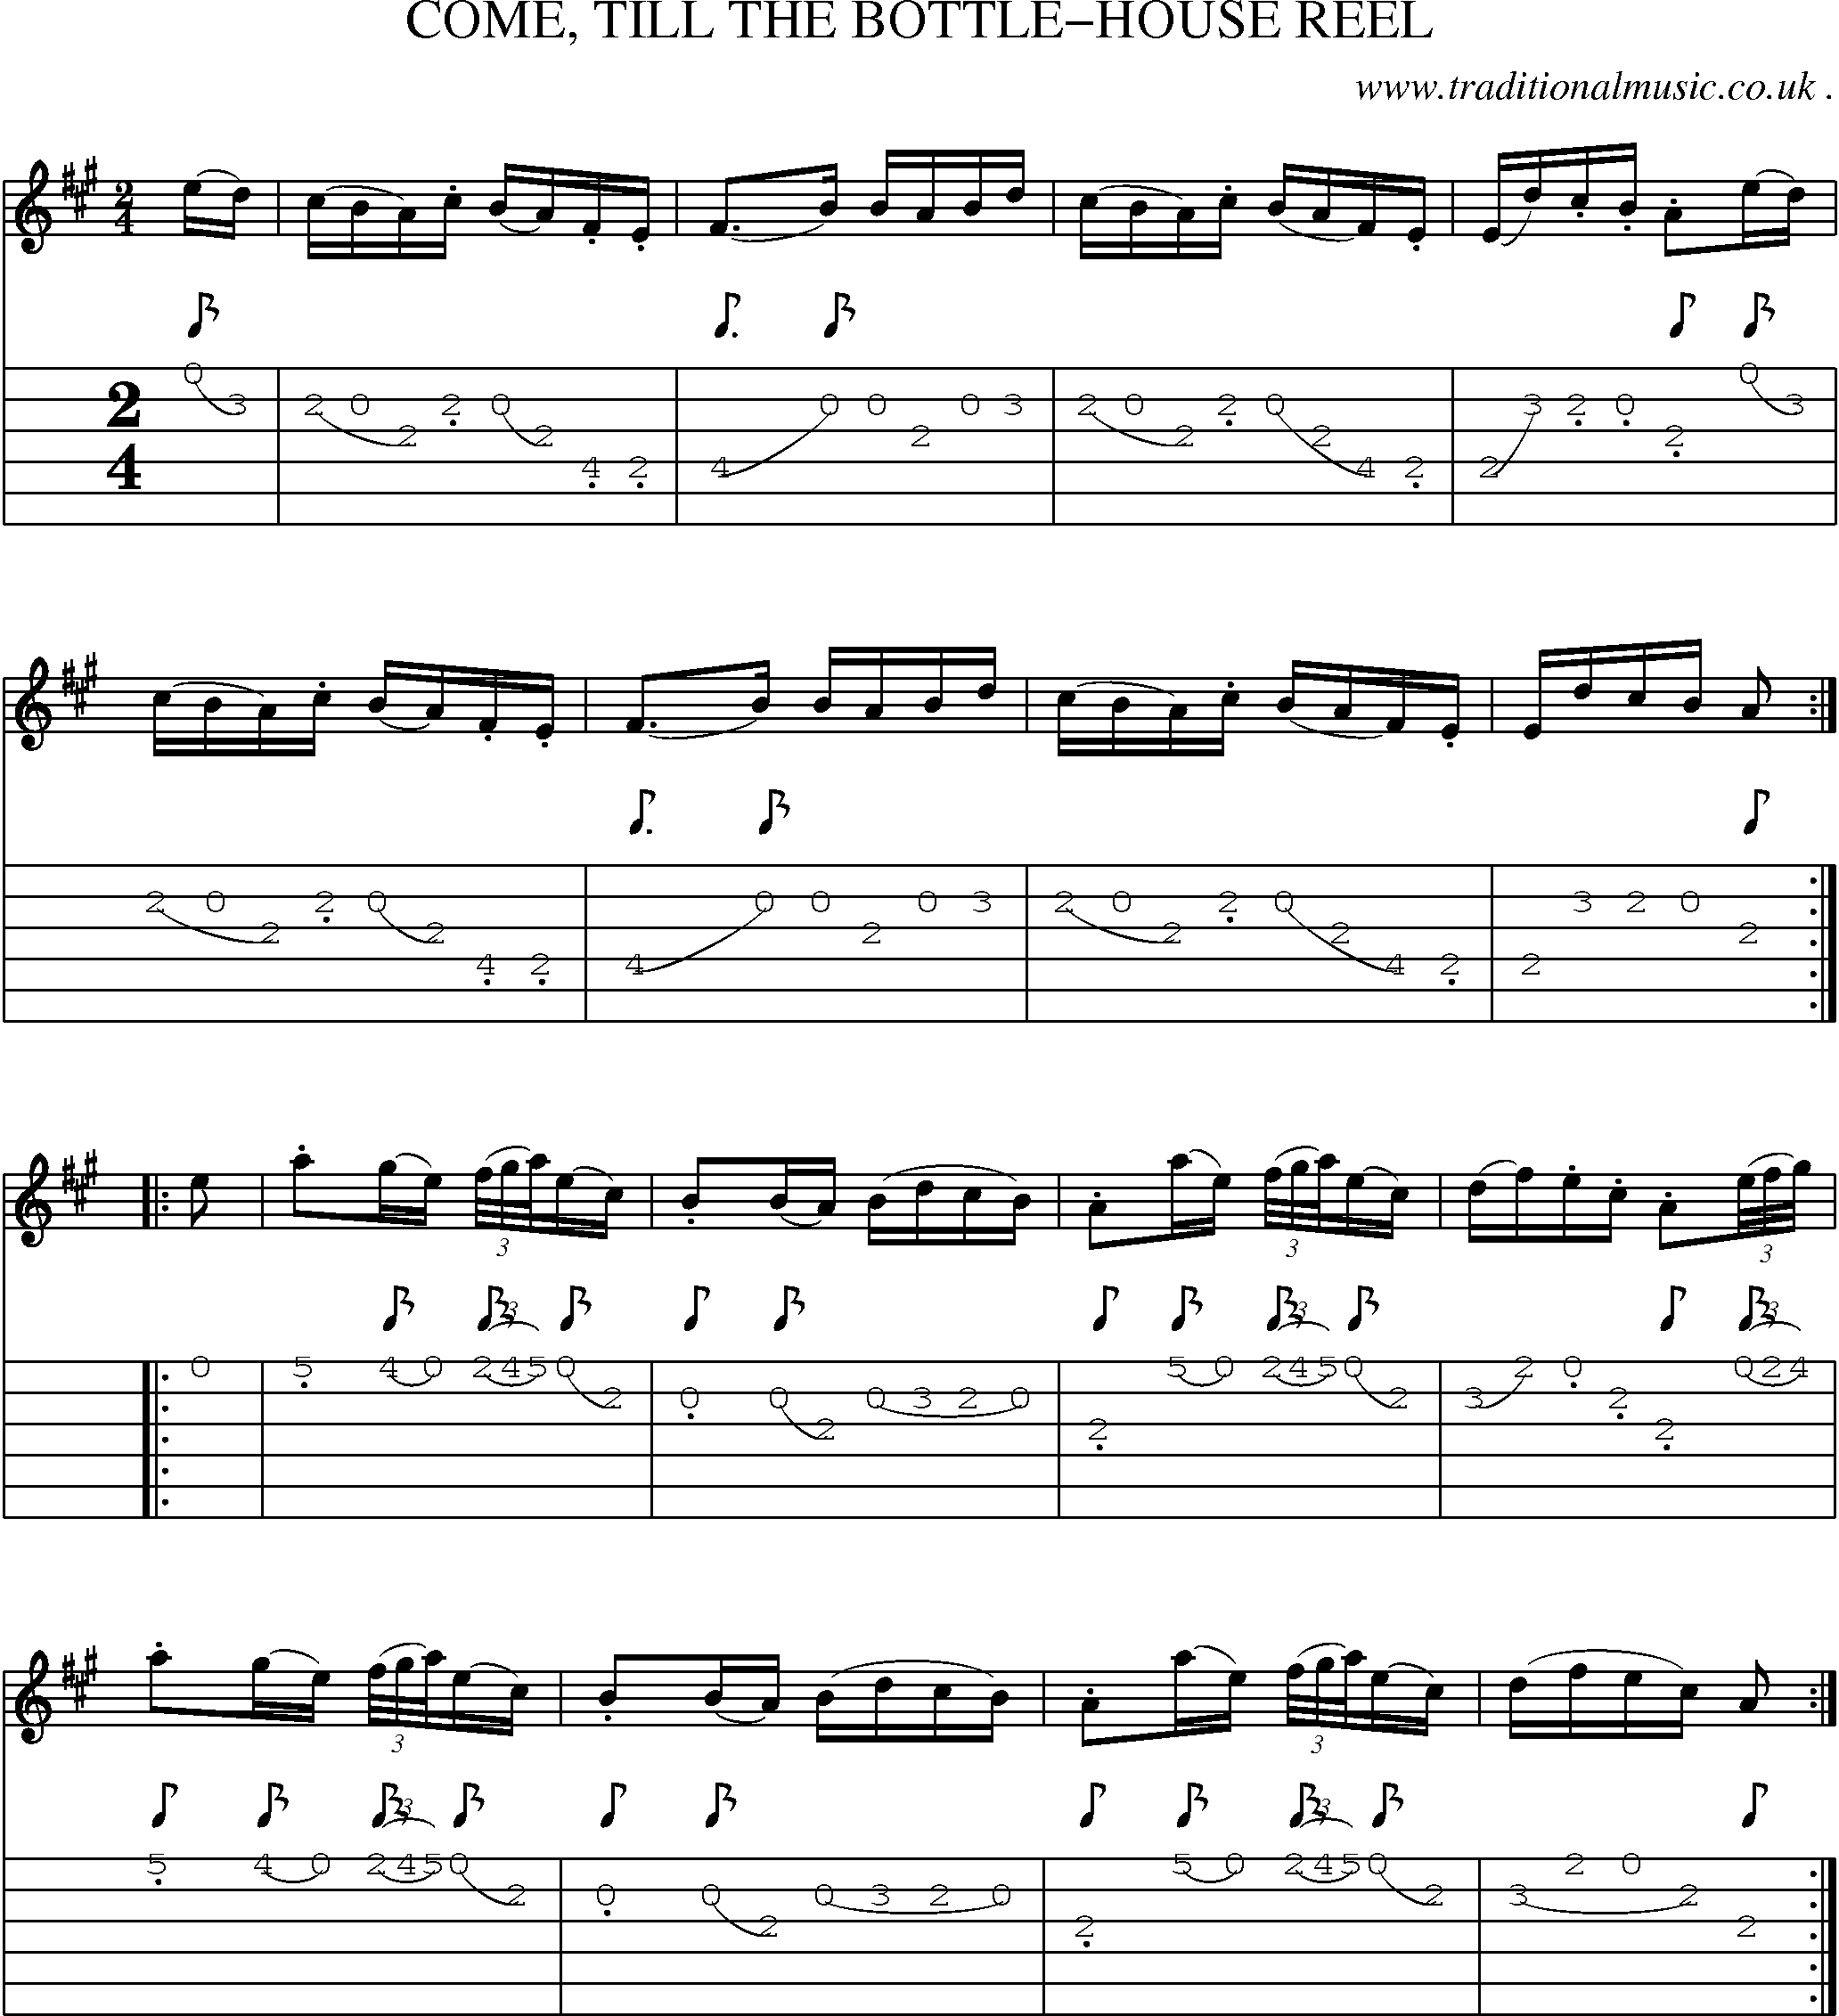 Sheet-Music and Guitar Tabs for Come Till The Bottle-house Reel